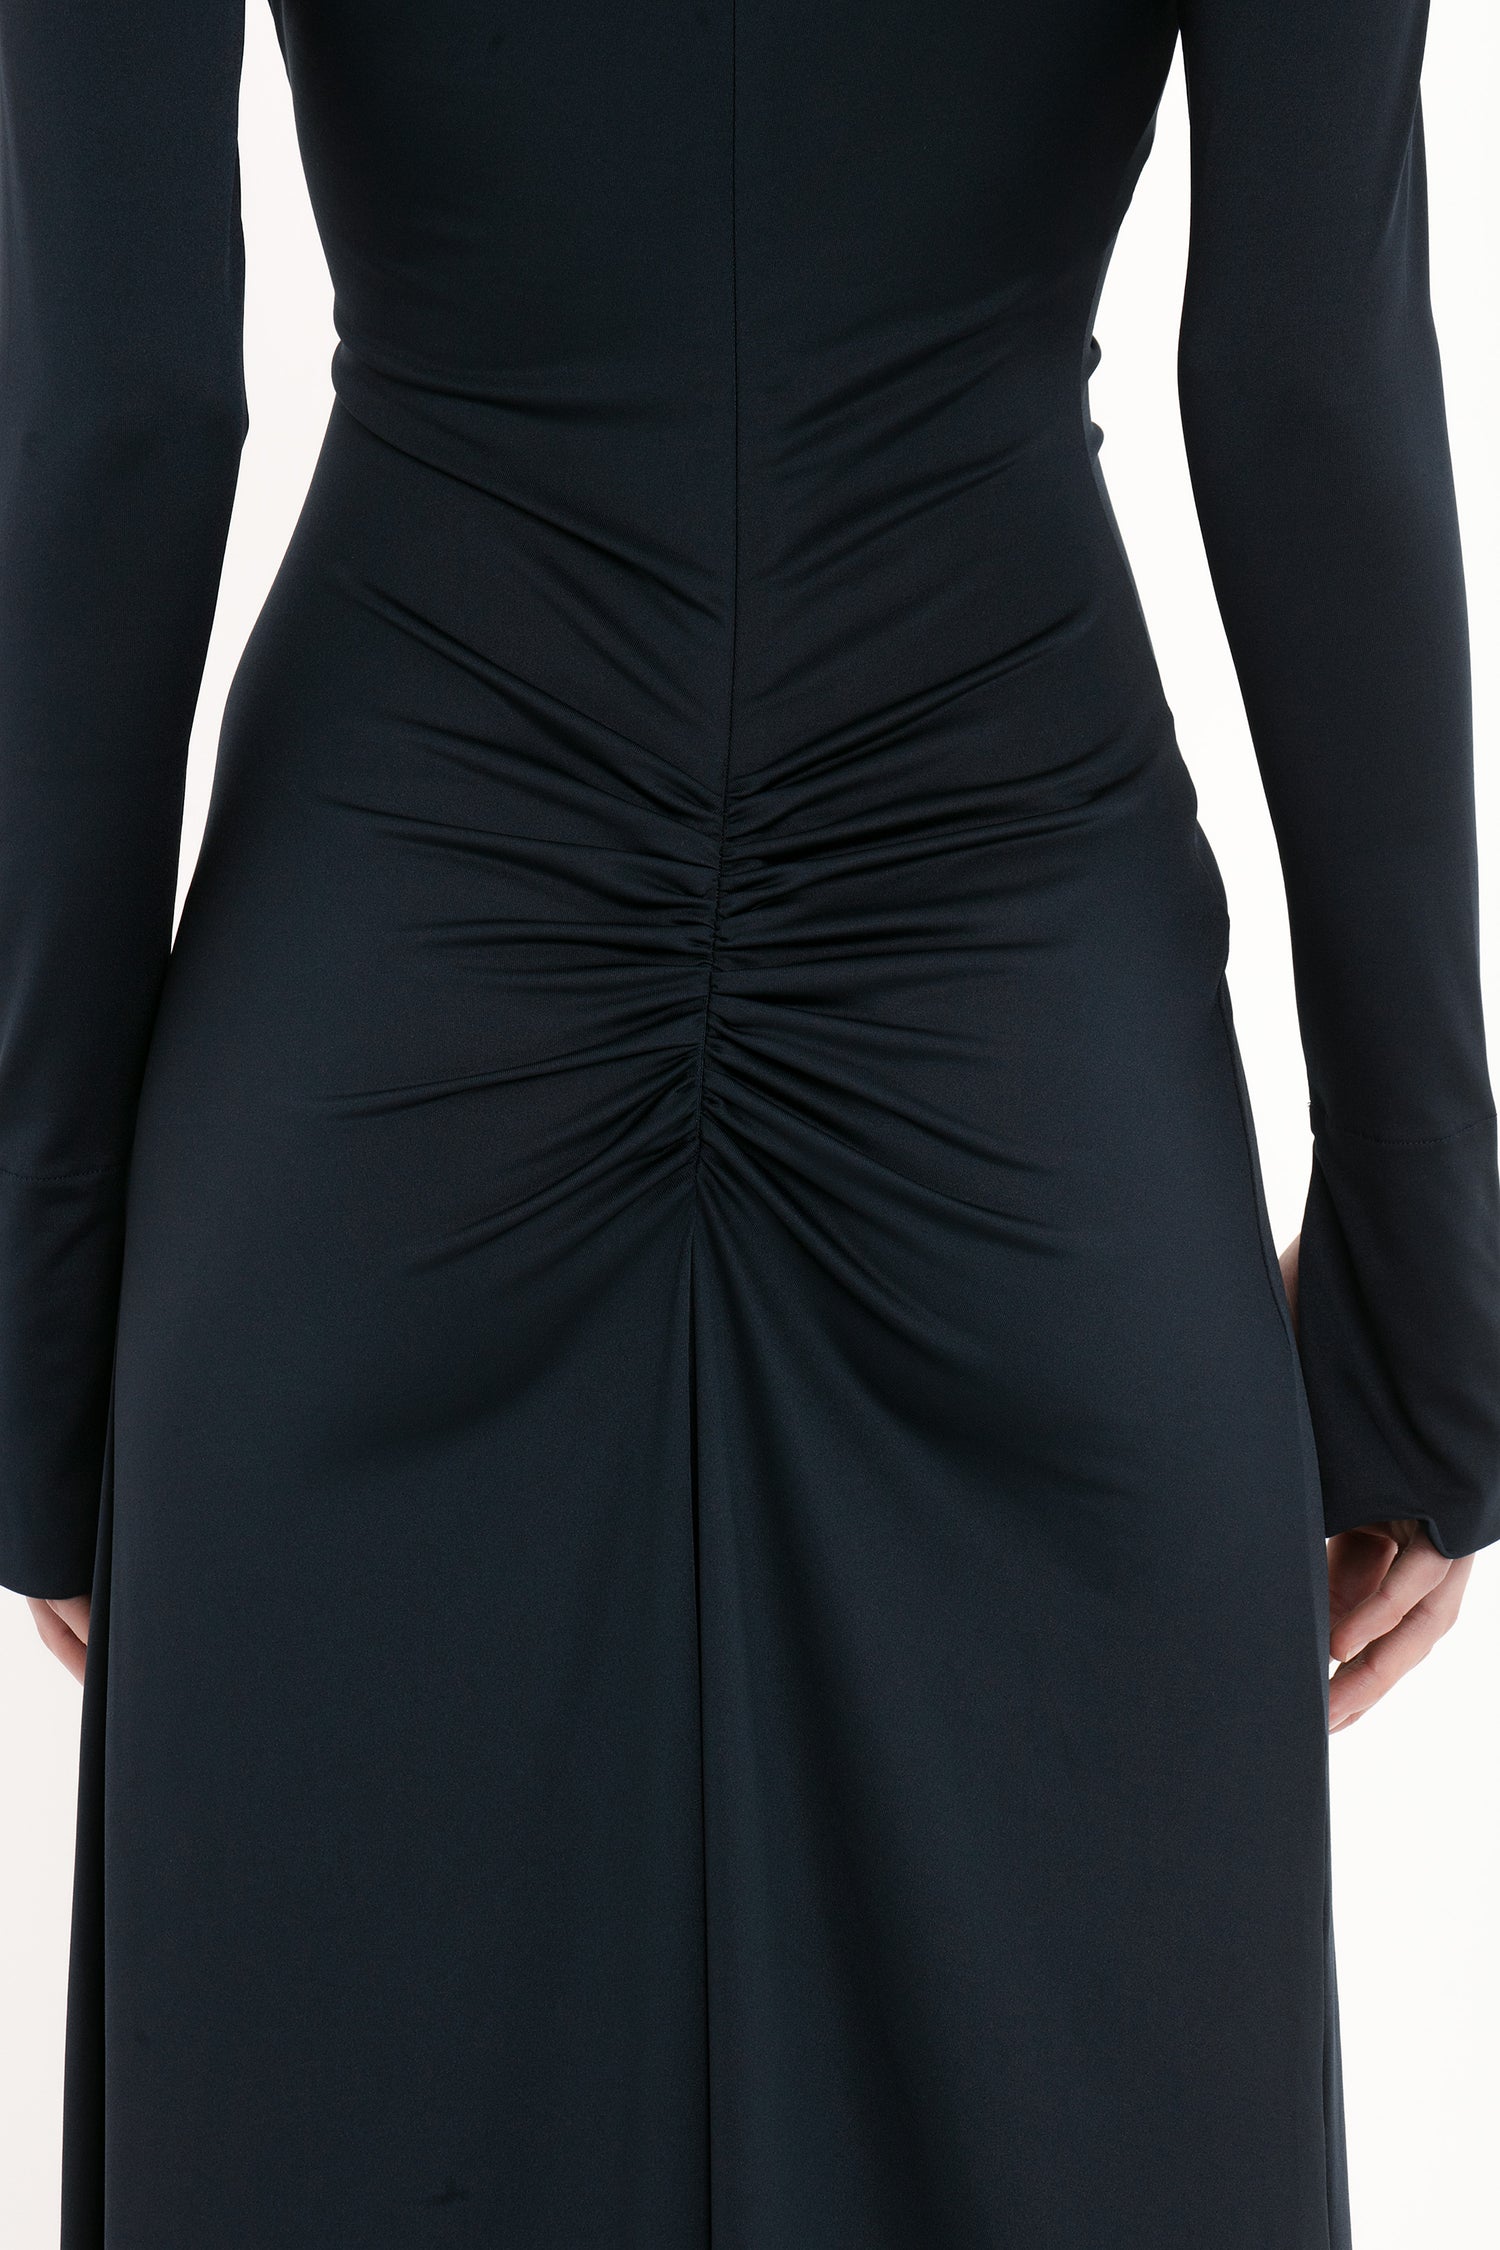 Back view of a person wearing a fitted, long-sleeve black Ruched Detail Floor-Length Gown In Midnight with sophisticated ruching at the lower back, reminiscent of the timeless elegance seen in Victoria Beckham's evening gowns.